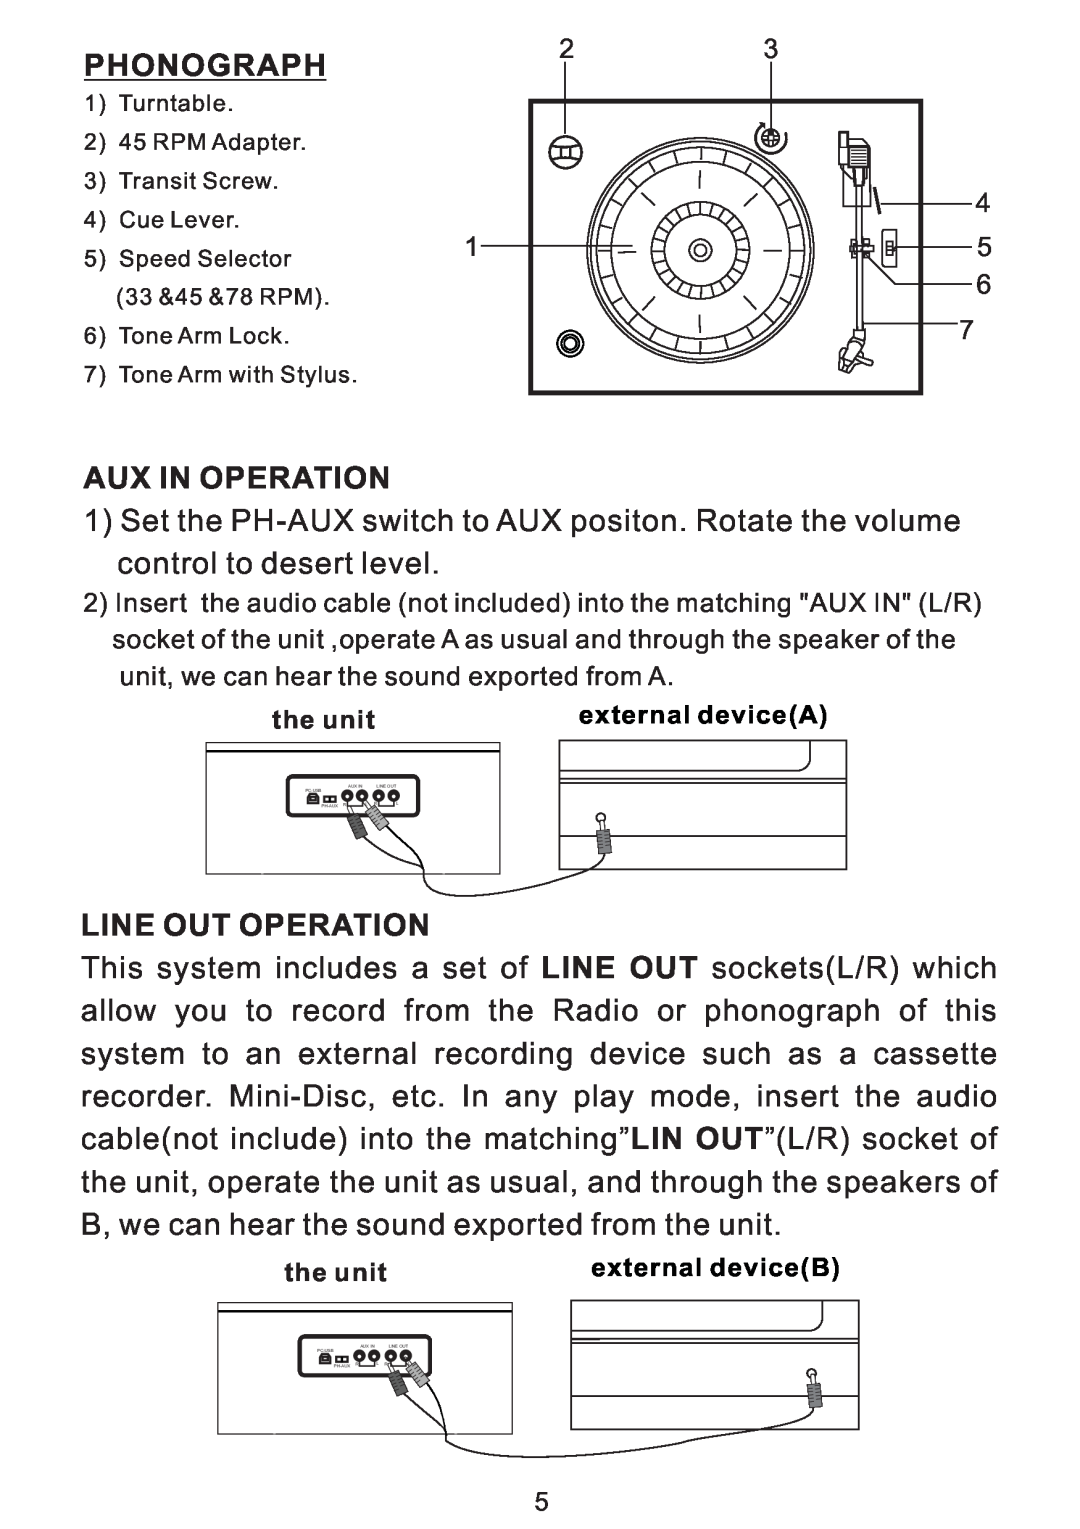 PYLE Audio PVNTT6UM manual Phonograph, Aux In Operation, Line Out Operation 